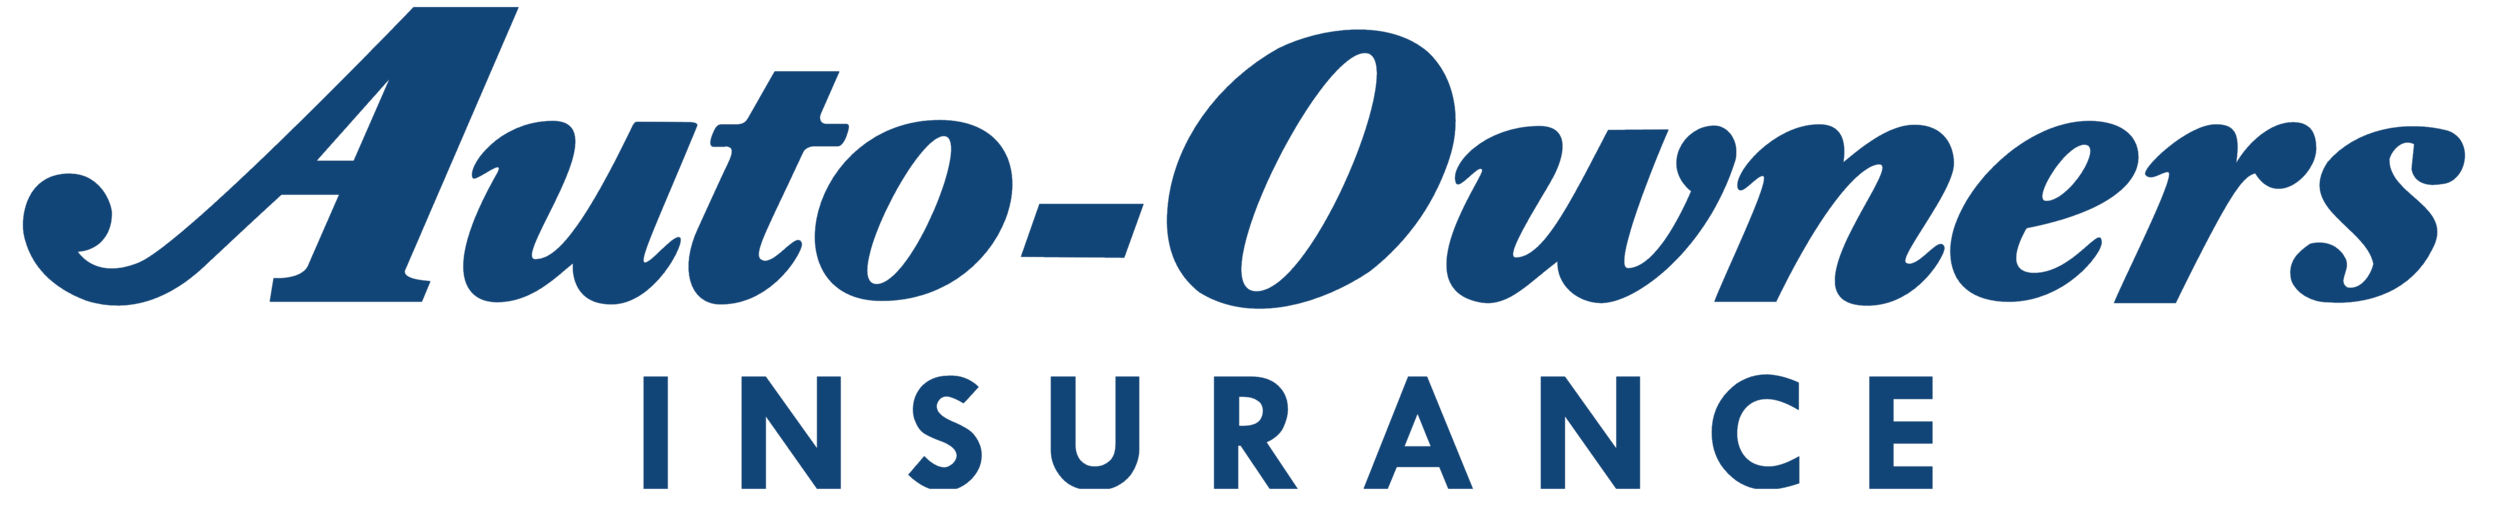 Auto-Owners_Insurance_logo_logotype.png